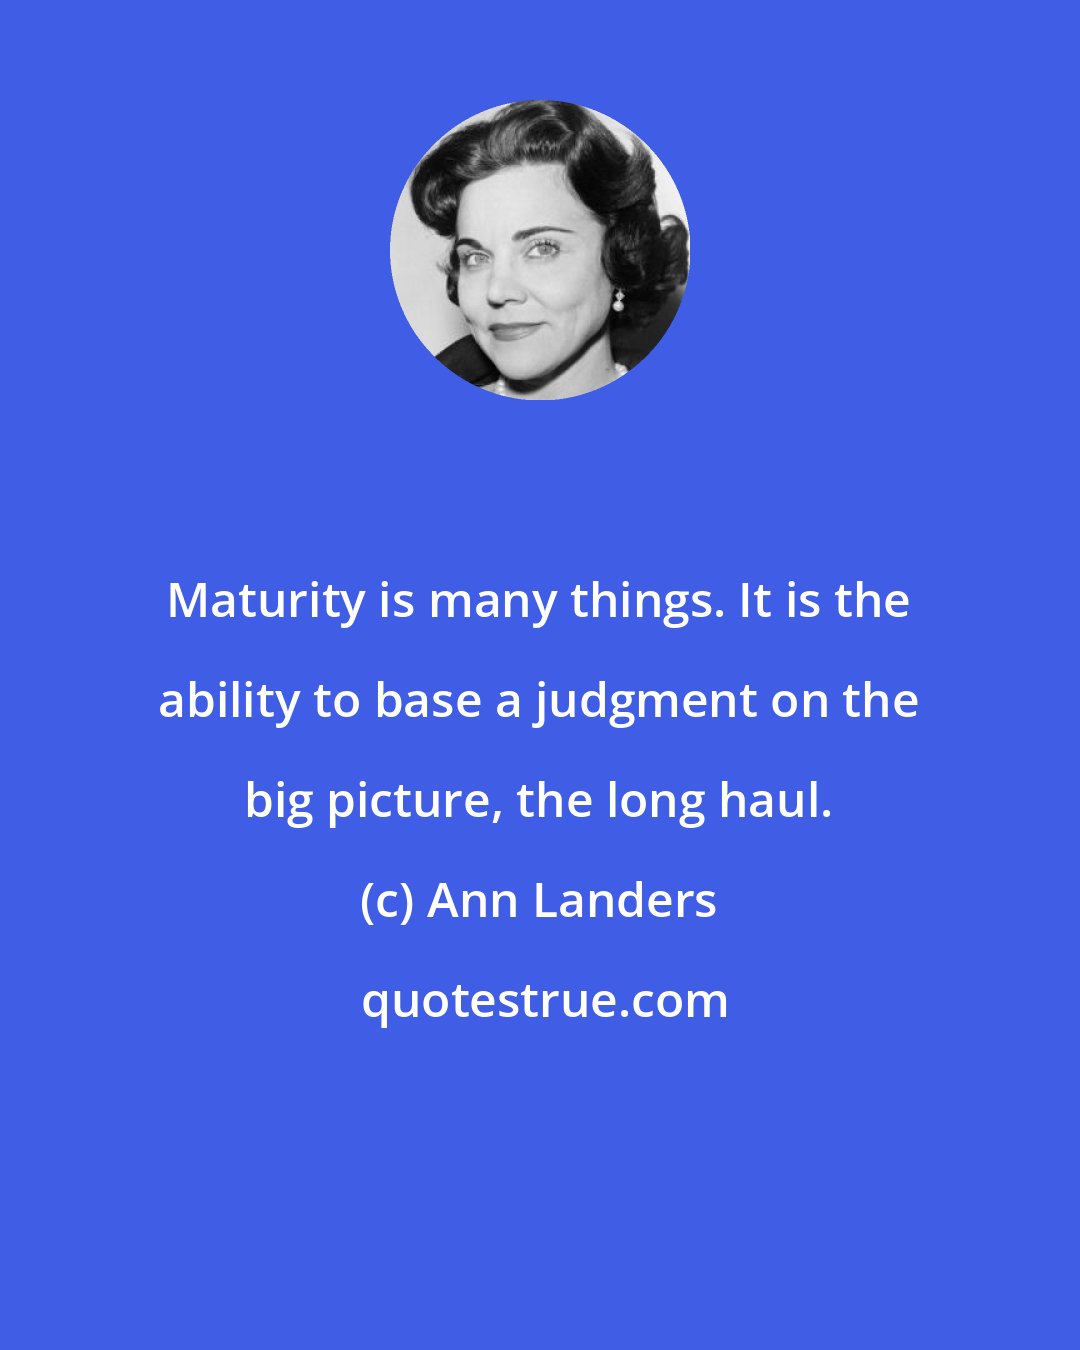 Ann Landers: Maturity is many things. It is the ability to base a judgment on the big picture, the long haul.